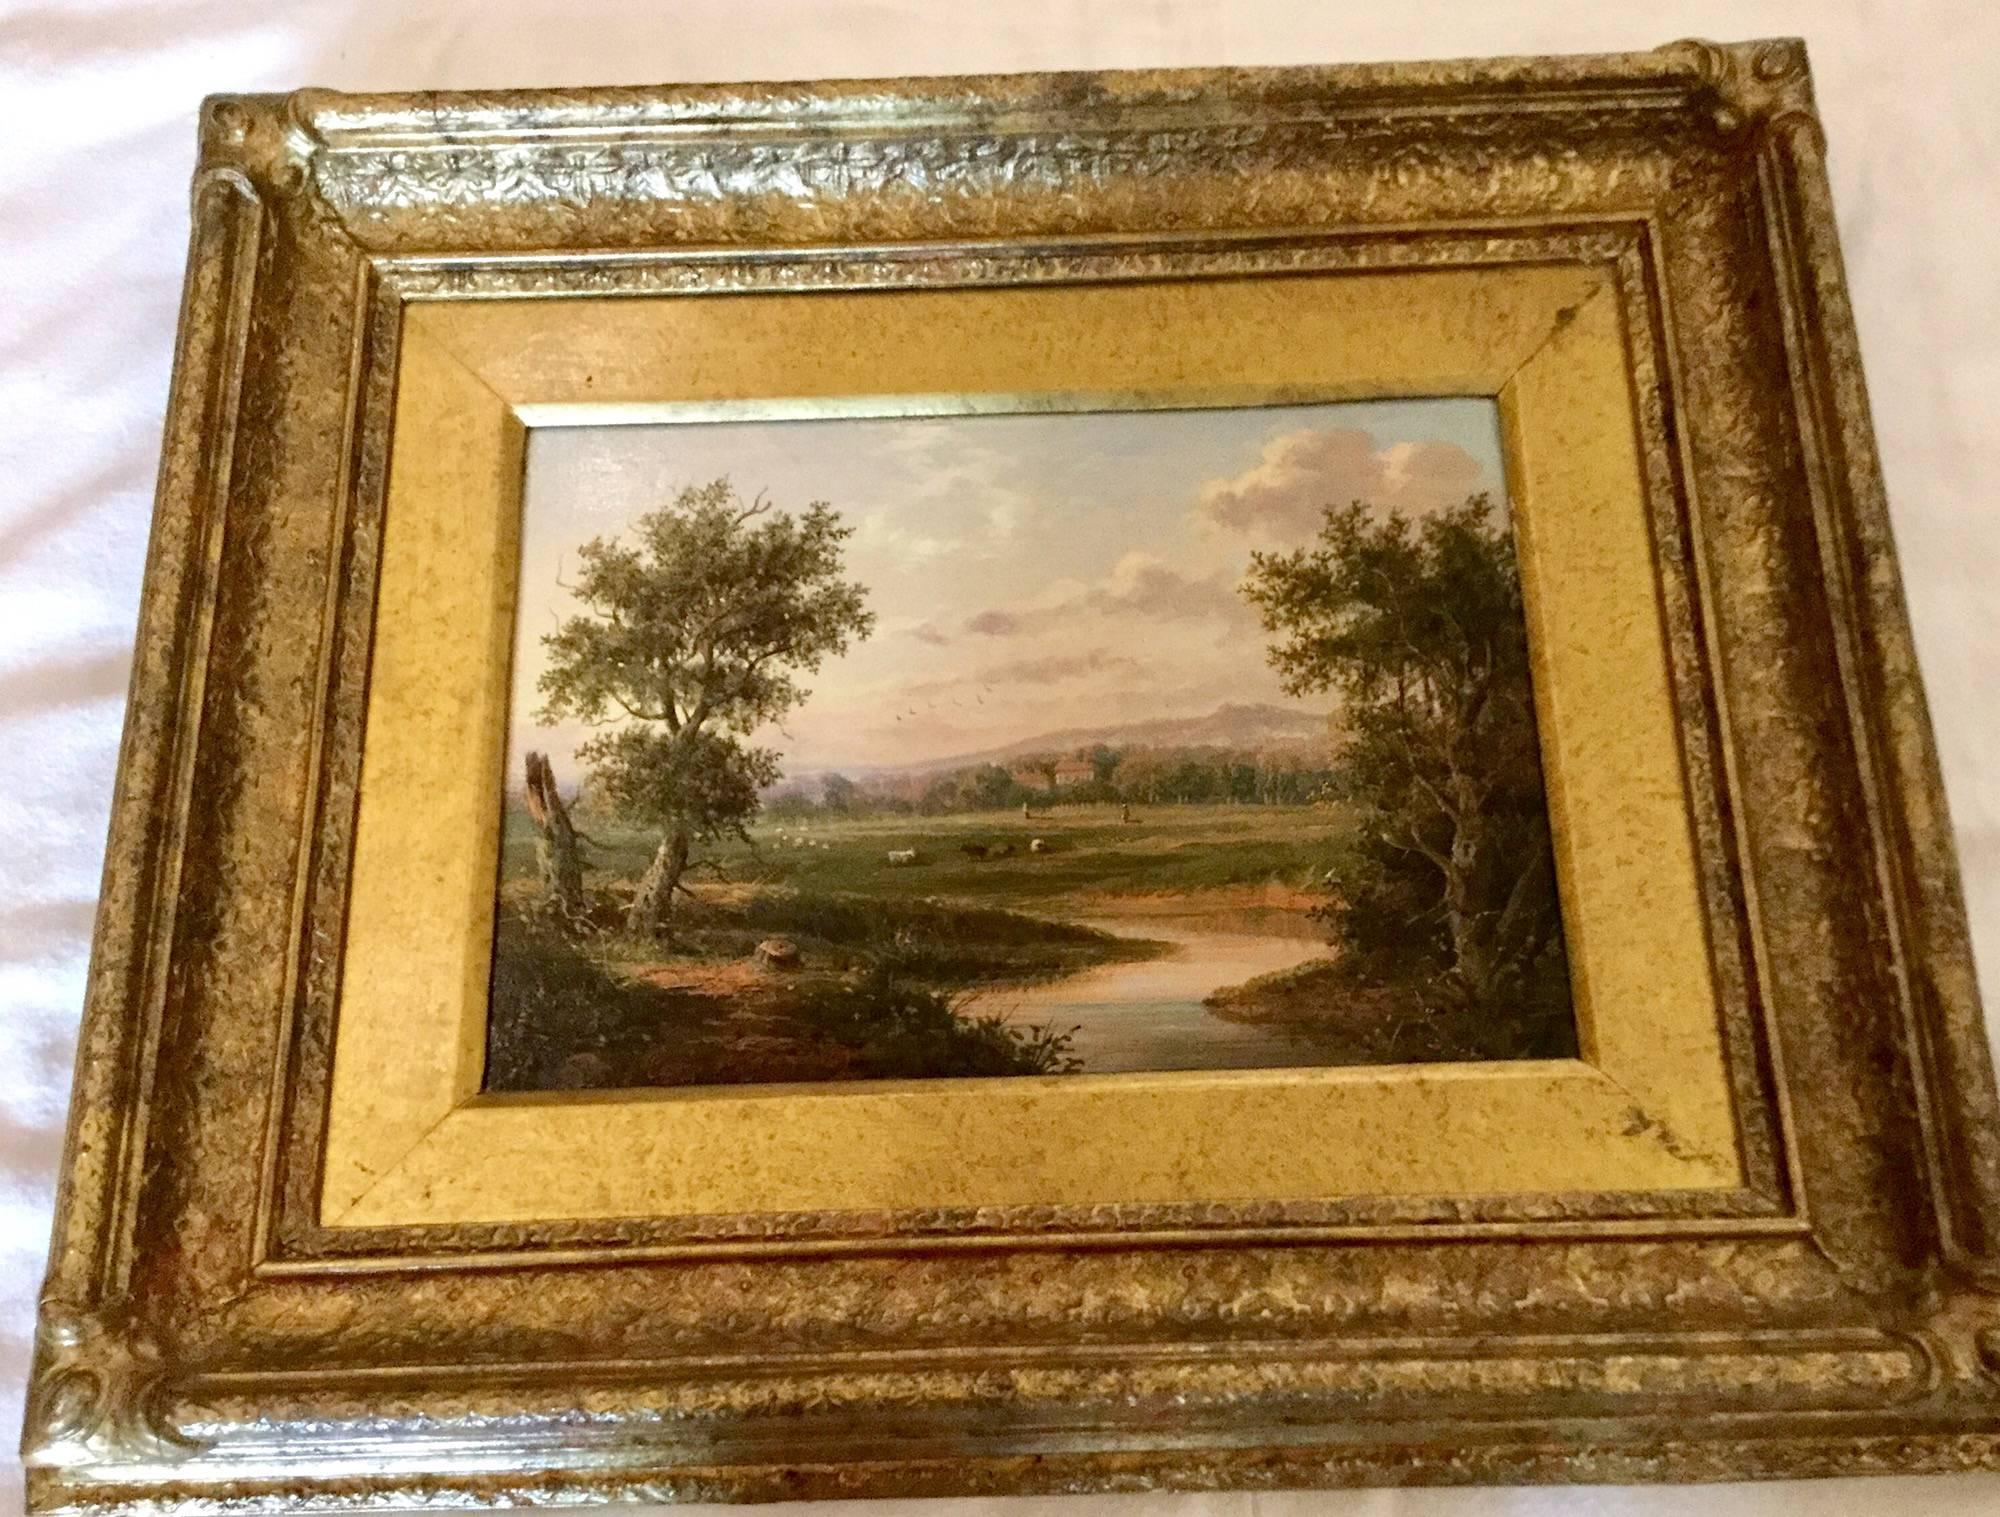 An English River Landscape by EDWIN BUTTERY (1839-1908)
 Oil on canvas.
Total size including picture and frame: 35cm x 43cm x 6cm
Clearly signed and dated 1869

A Nineteenth Century British landscape artist.  Buttery painted the tranquil and